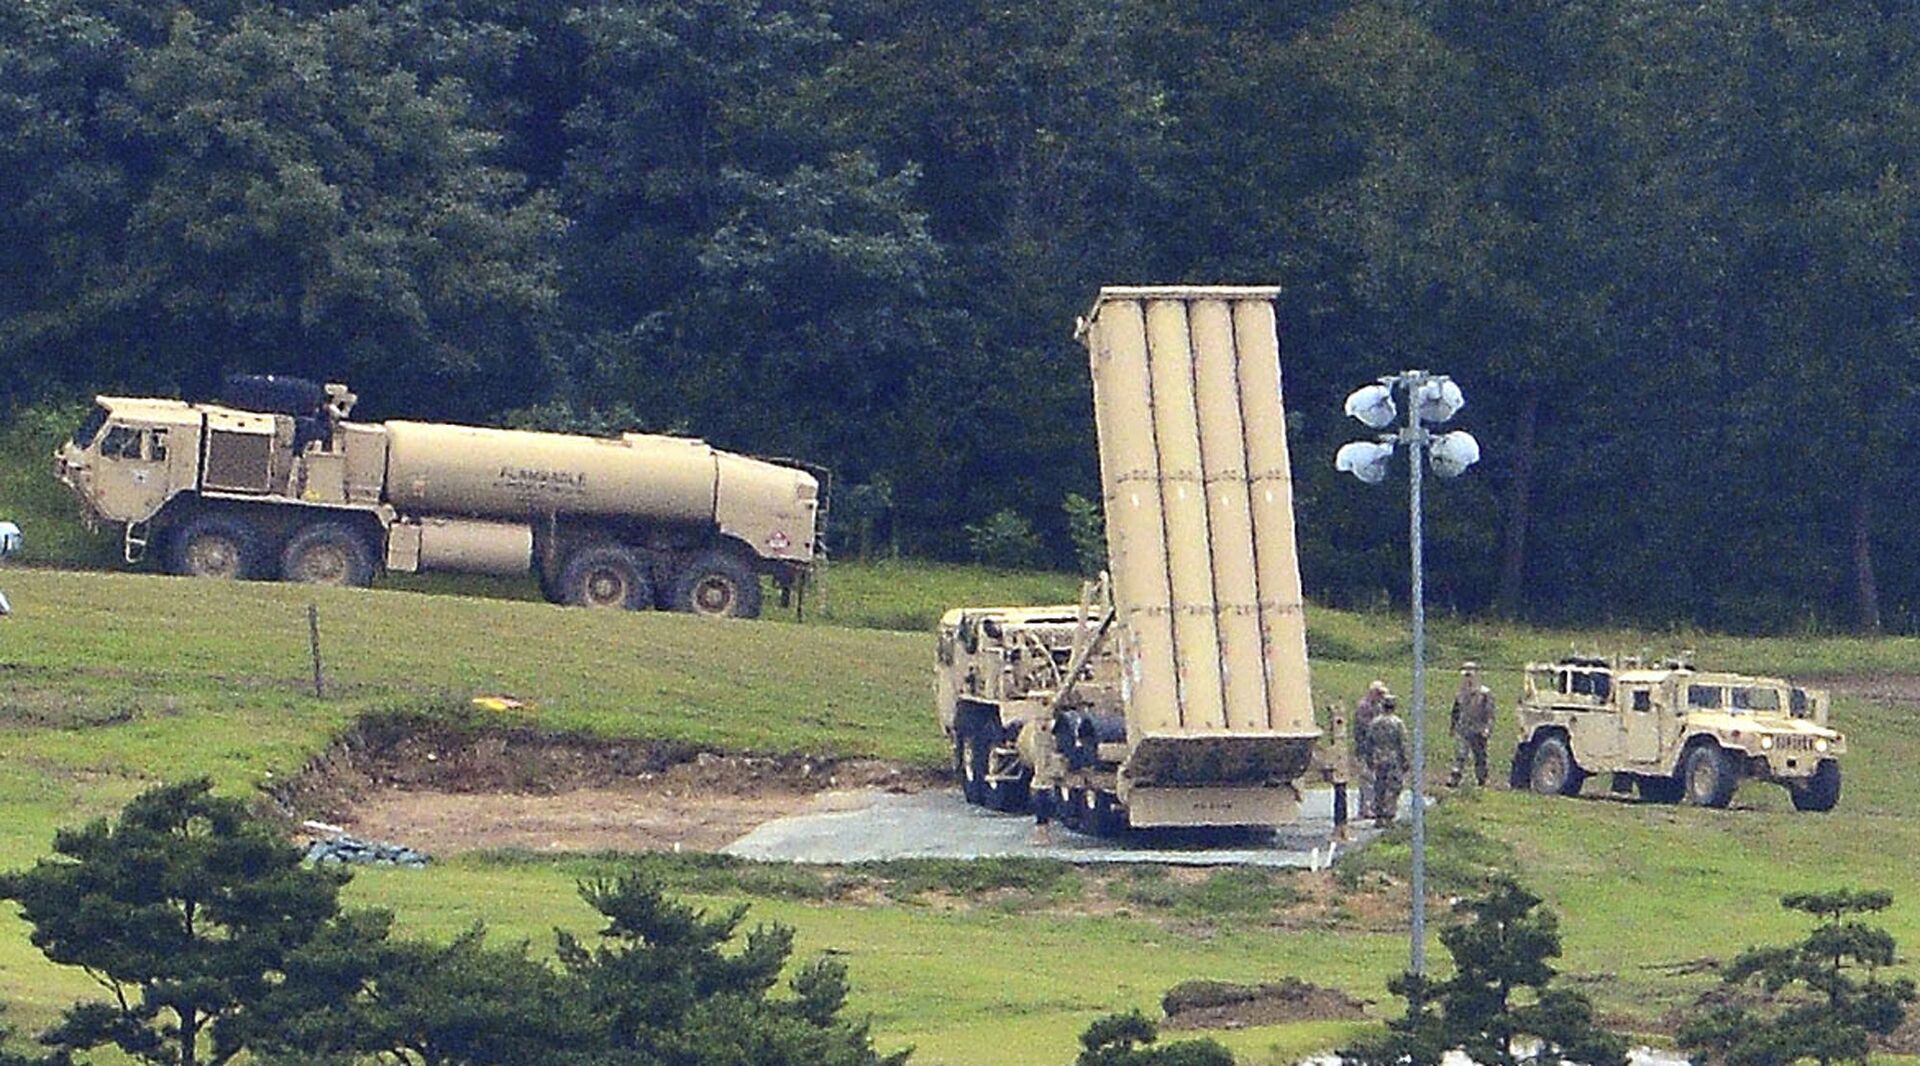 U.S. missile defense system called Terminal High Altitude Area Defense, or THAAD, is seen at a golf course in Seongju, South Korea, Wednesday, Sept. 6, 2017 - Sputnik International, 1920, 02.12.2021